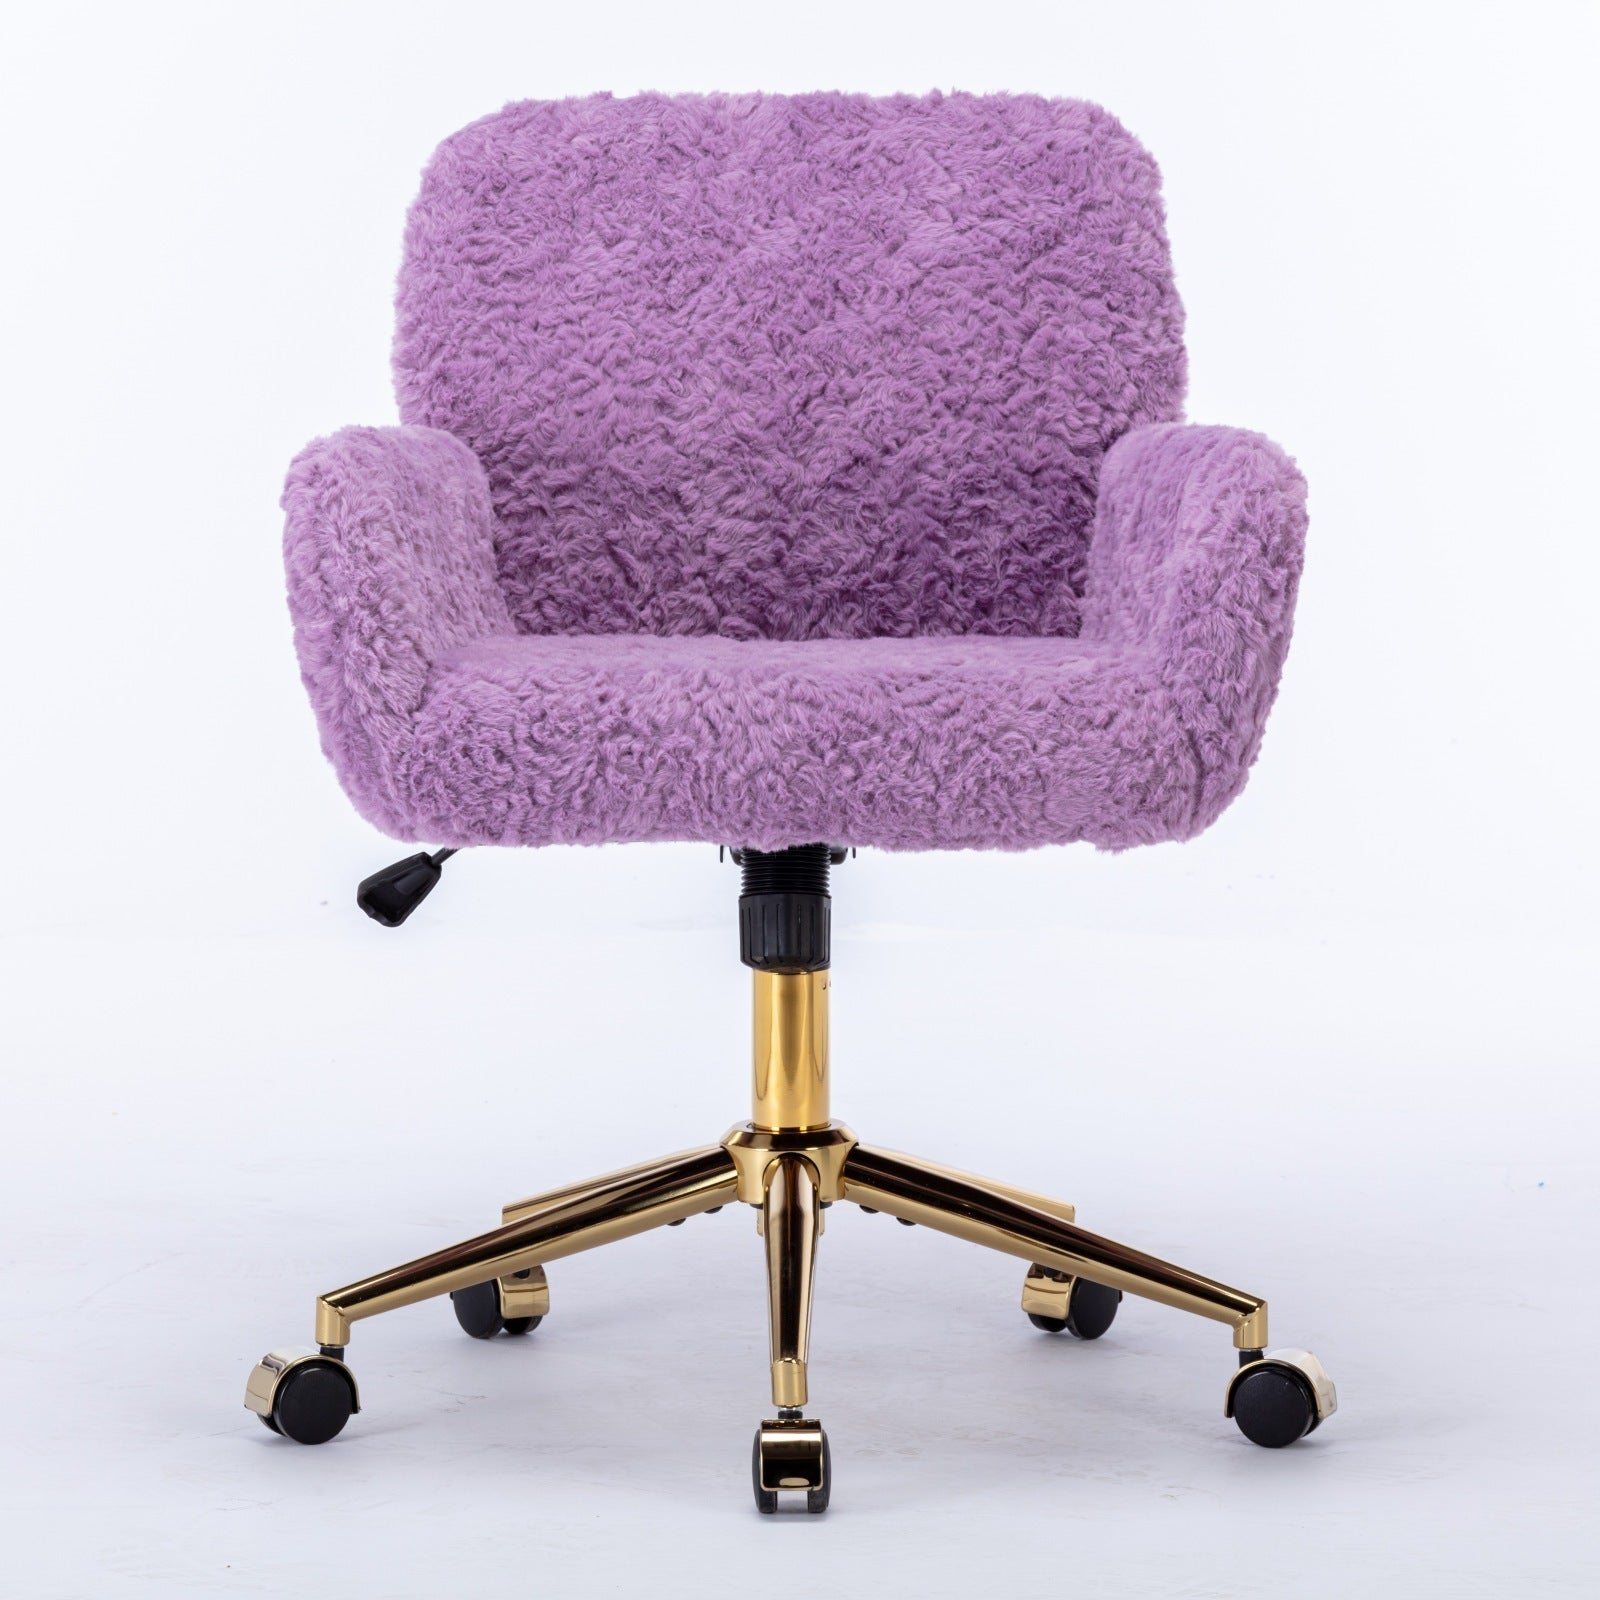 🆓🚛 Furniture Office Chair, Artificial Rabbit Hair Home Office Chair With Golden Metal Base, Adjustable Desk Chair Swivel Office Chair, Vanity Chair, Violet